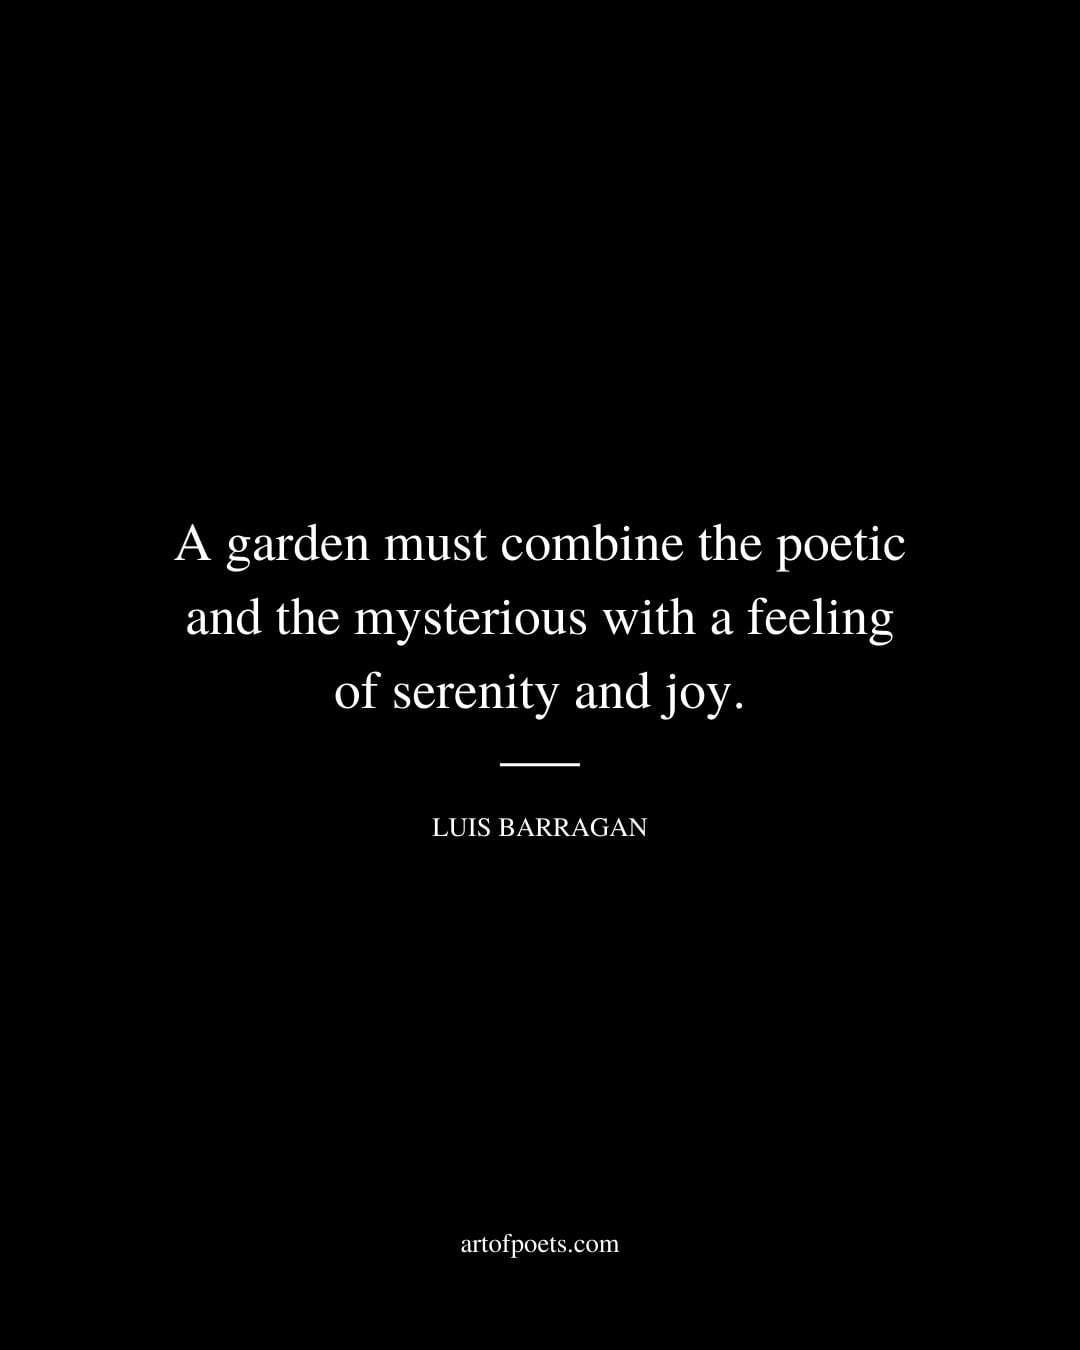 A garden must combine the poetic and the mysterious with a feeling of serenity and joy. – Luis Barragan